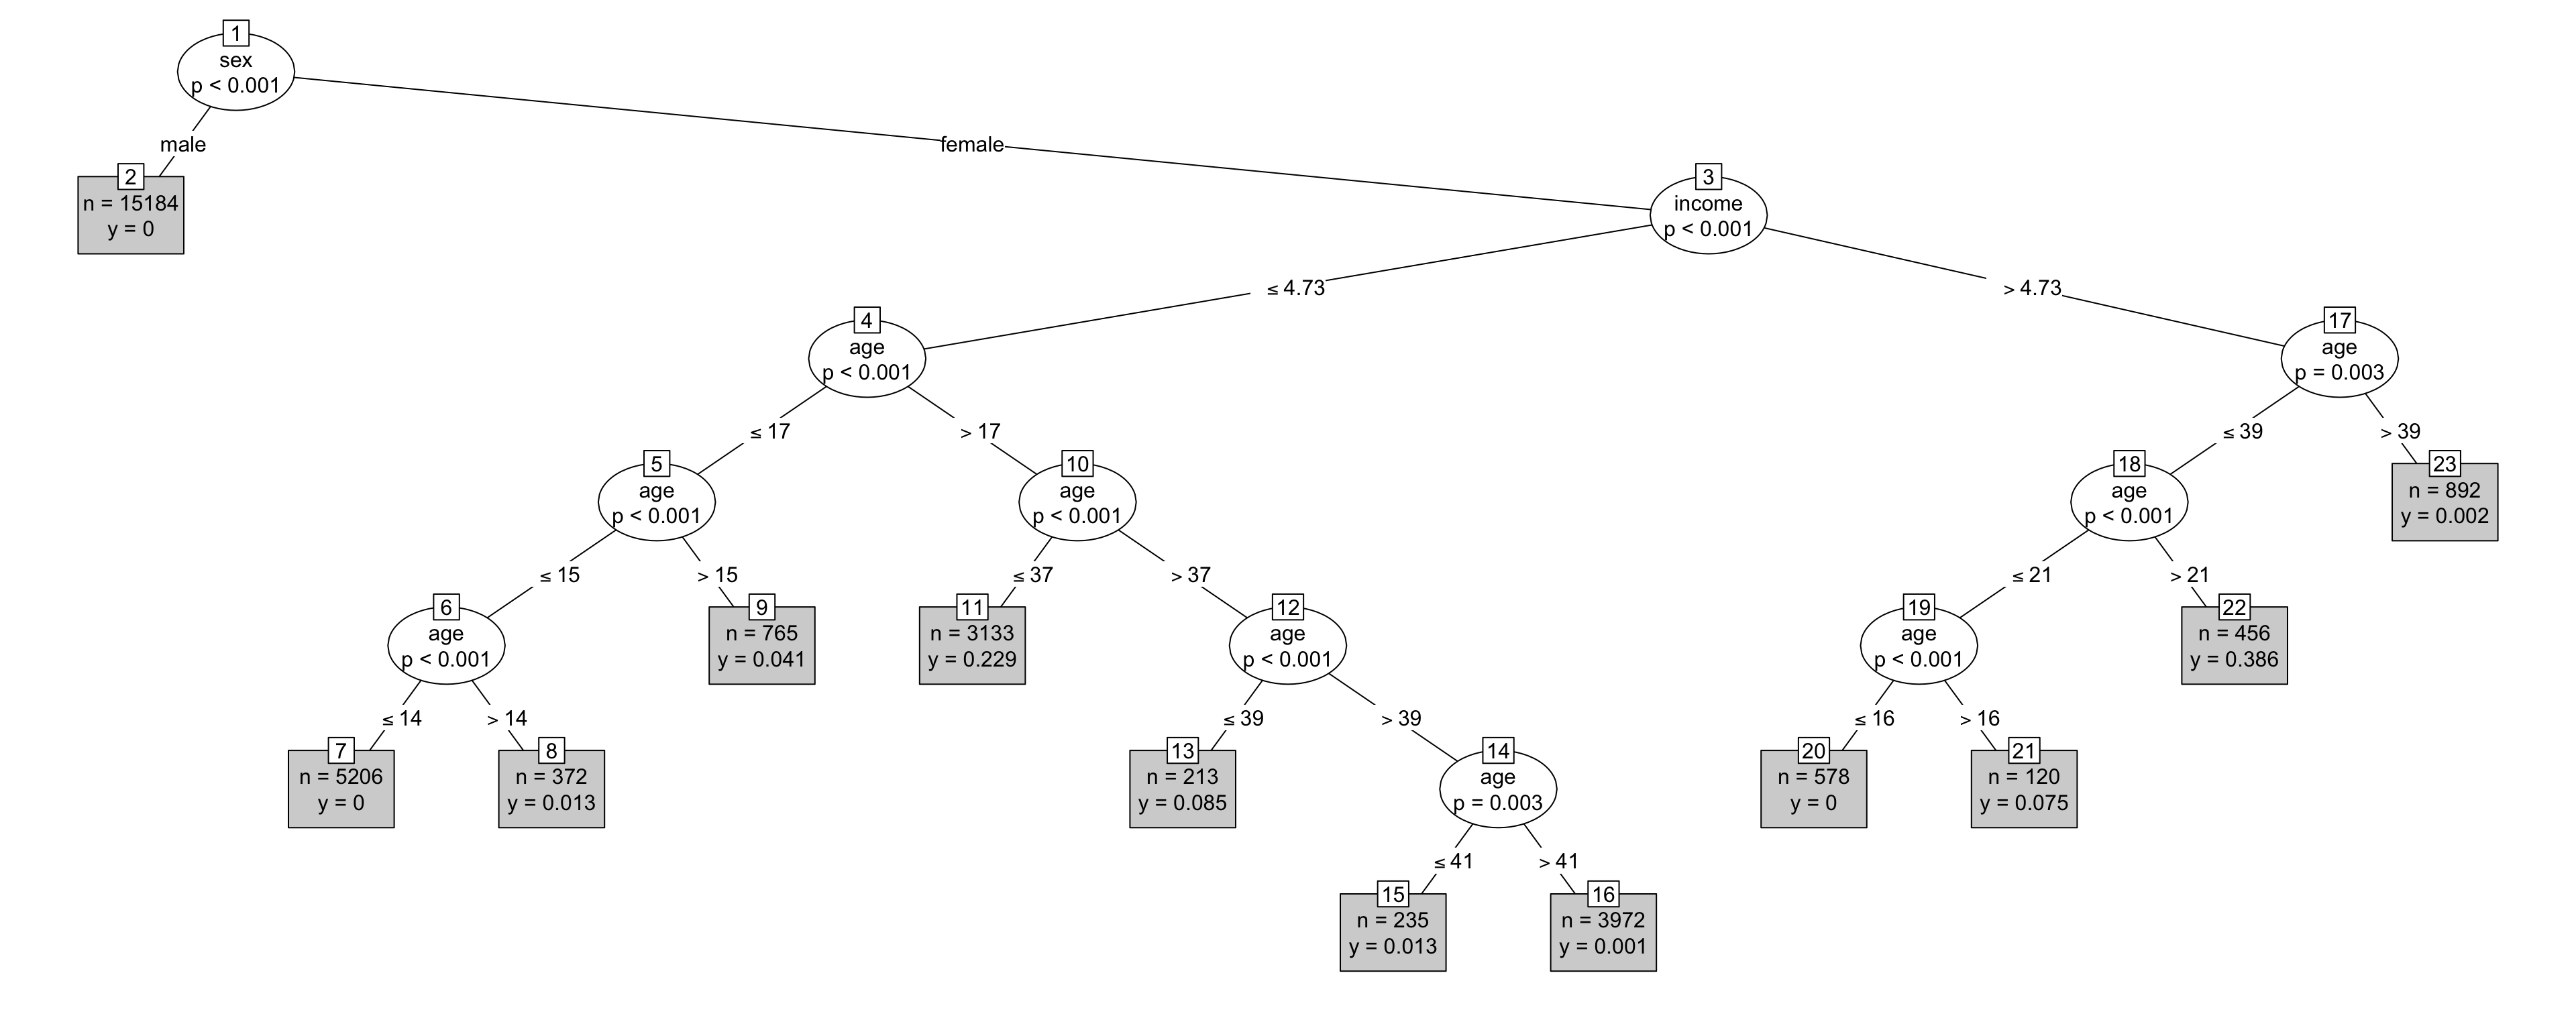 The decision tree from the `whoIsPregnant` model.